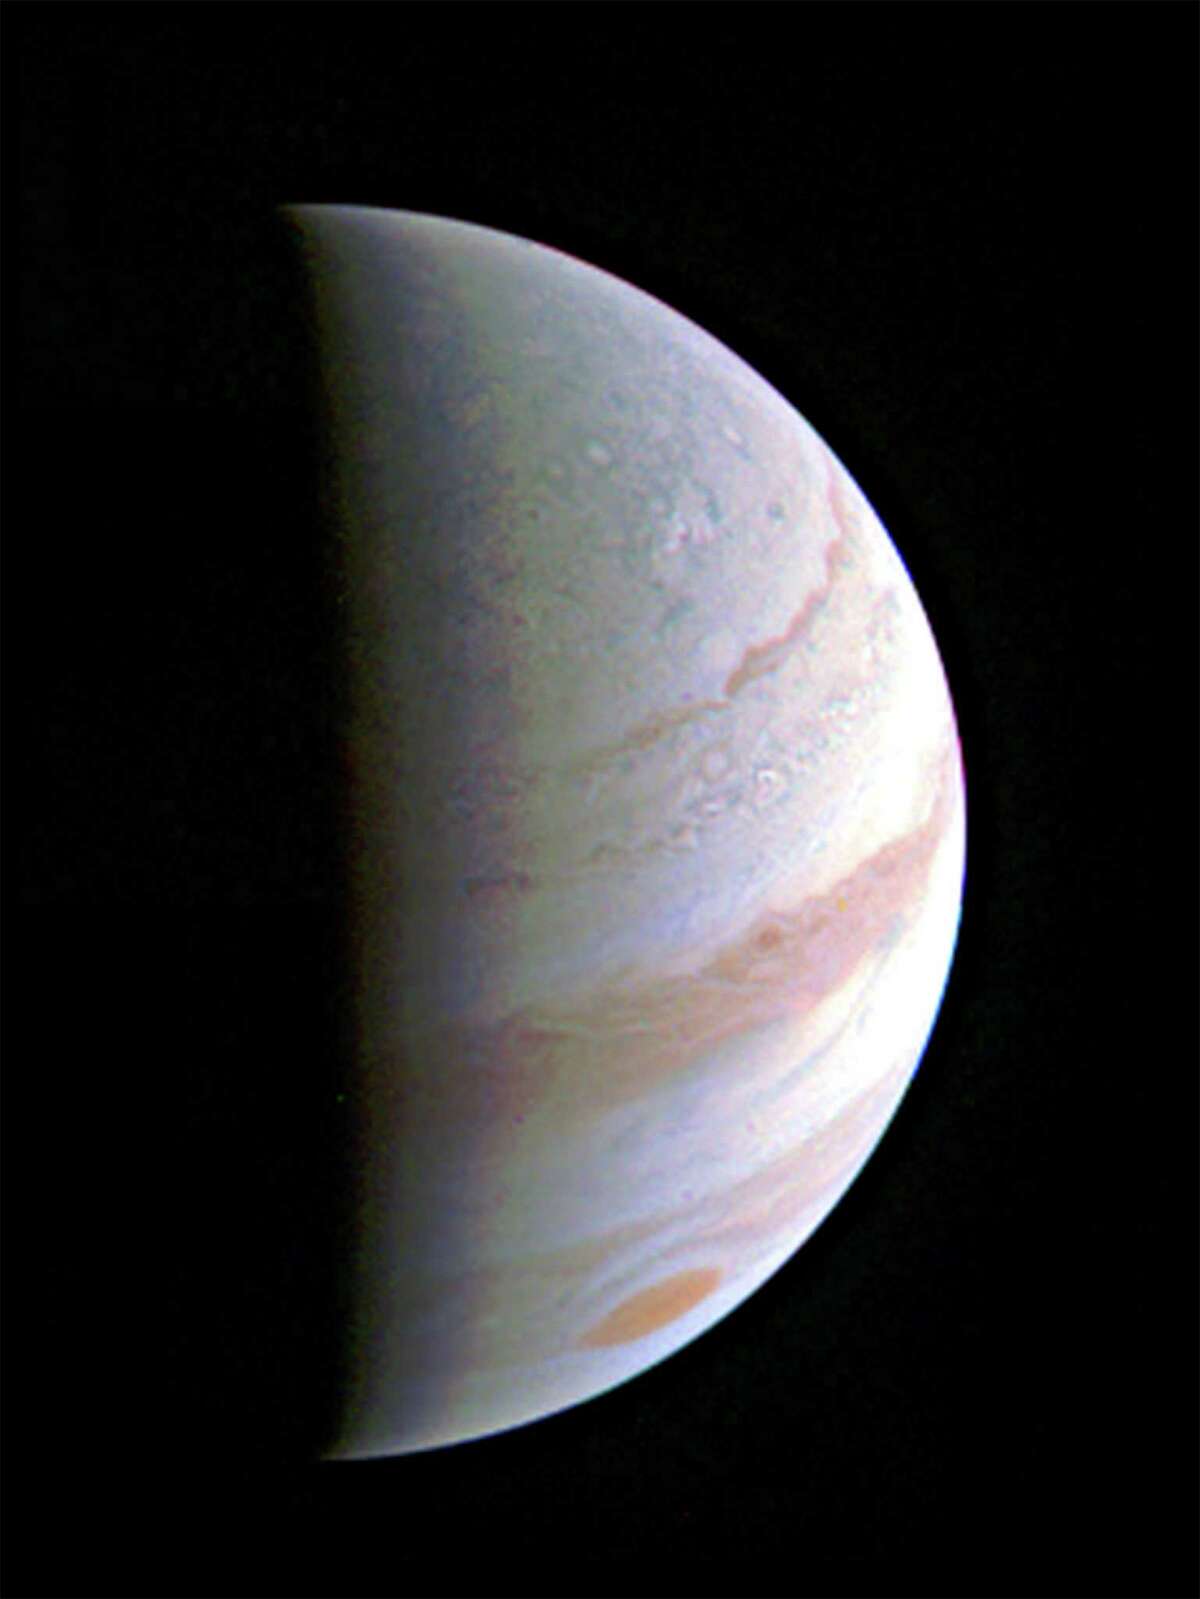 Juno misson leader Scott Bolton, below, will be getting many more images of Jupiter this year.